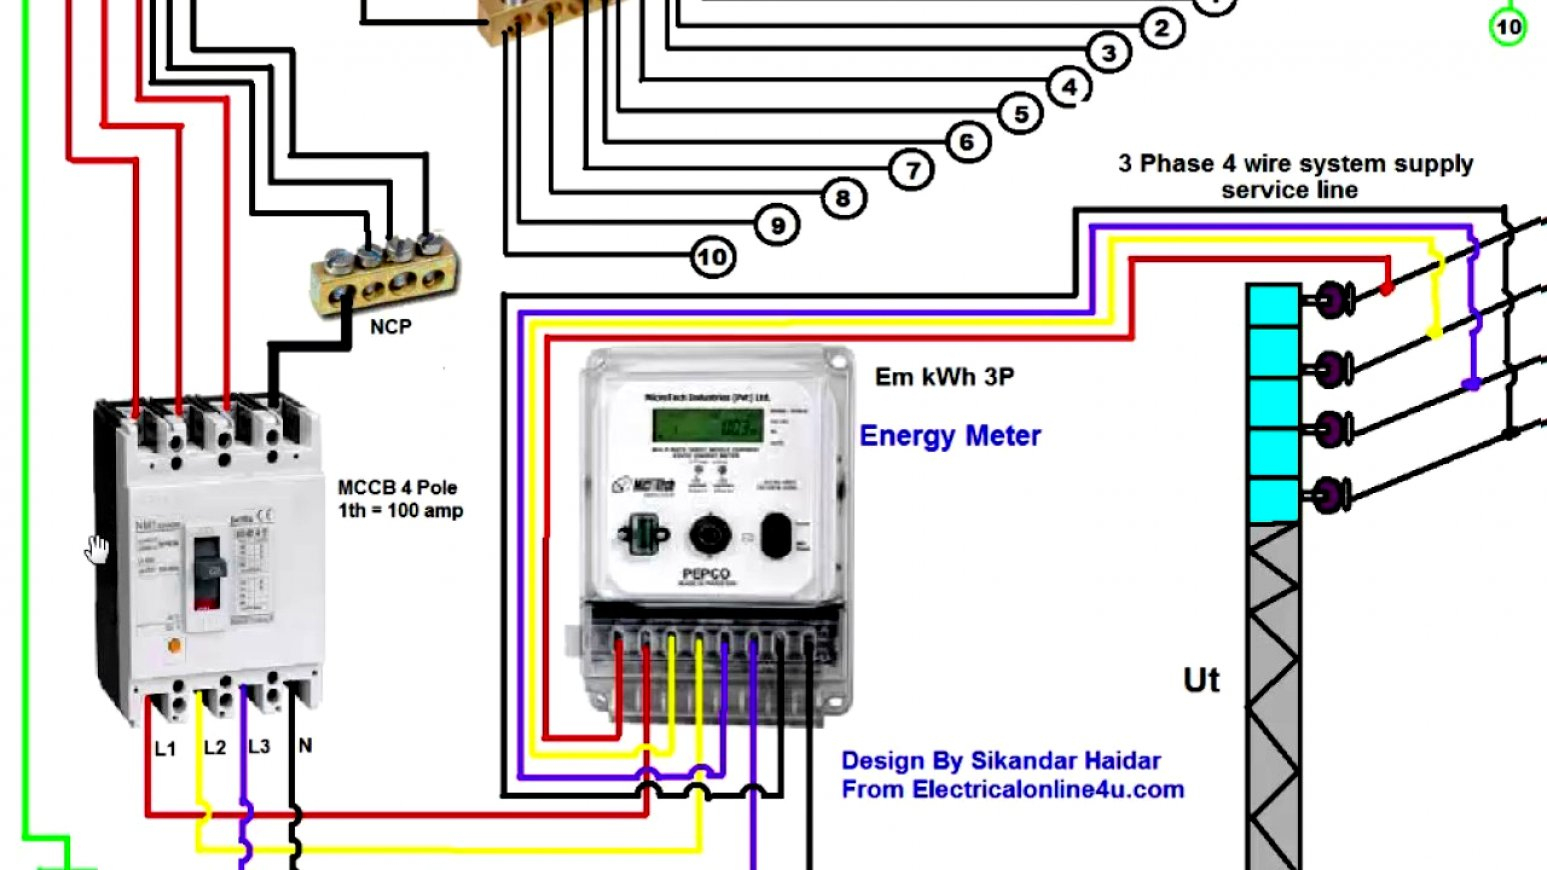 3 Phase 4 Wire Diagram Of Energy Meter | Wiring Diagram - Electric Meter Wiring Diagram